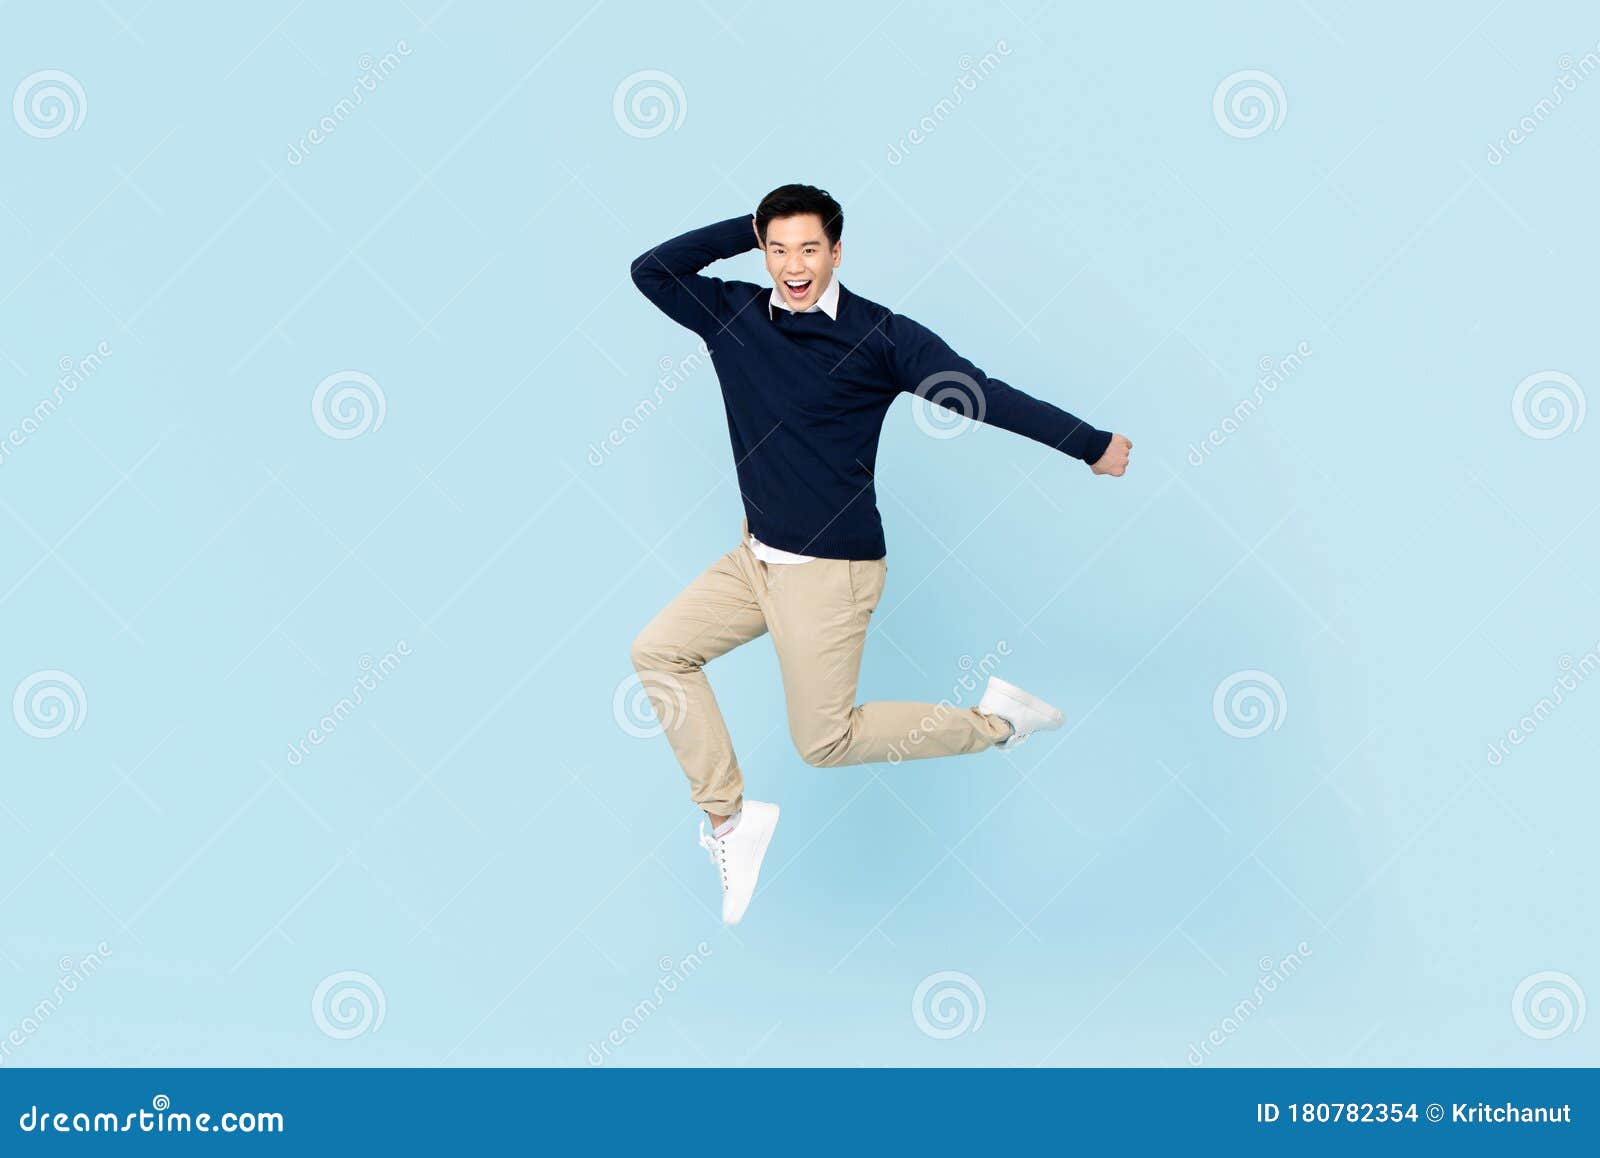 Smiling Young Handsome Asian Man Jumping Stock Photo - Image of ...